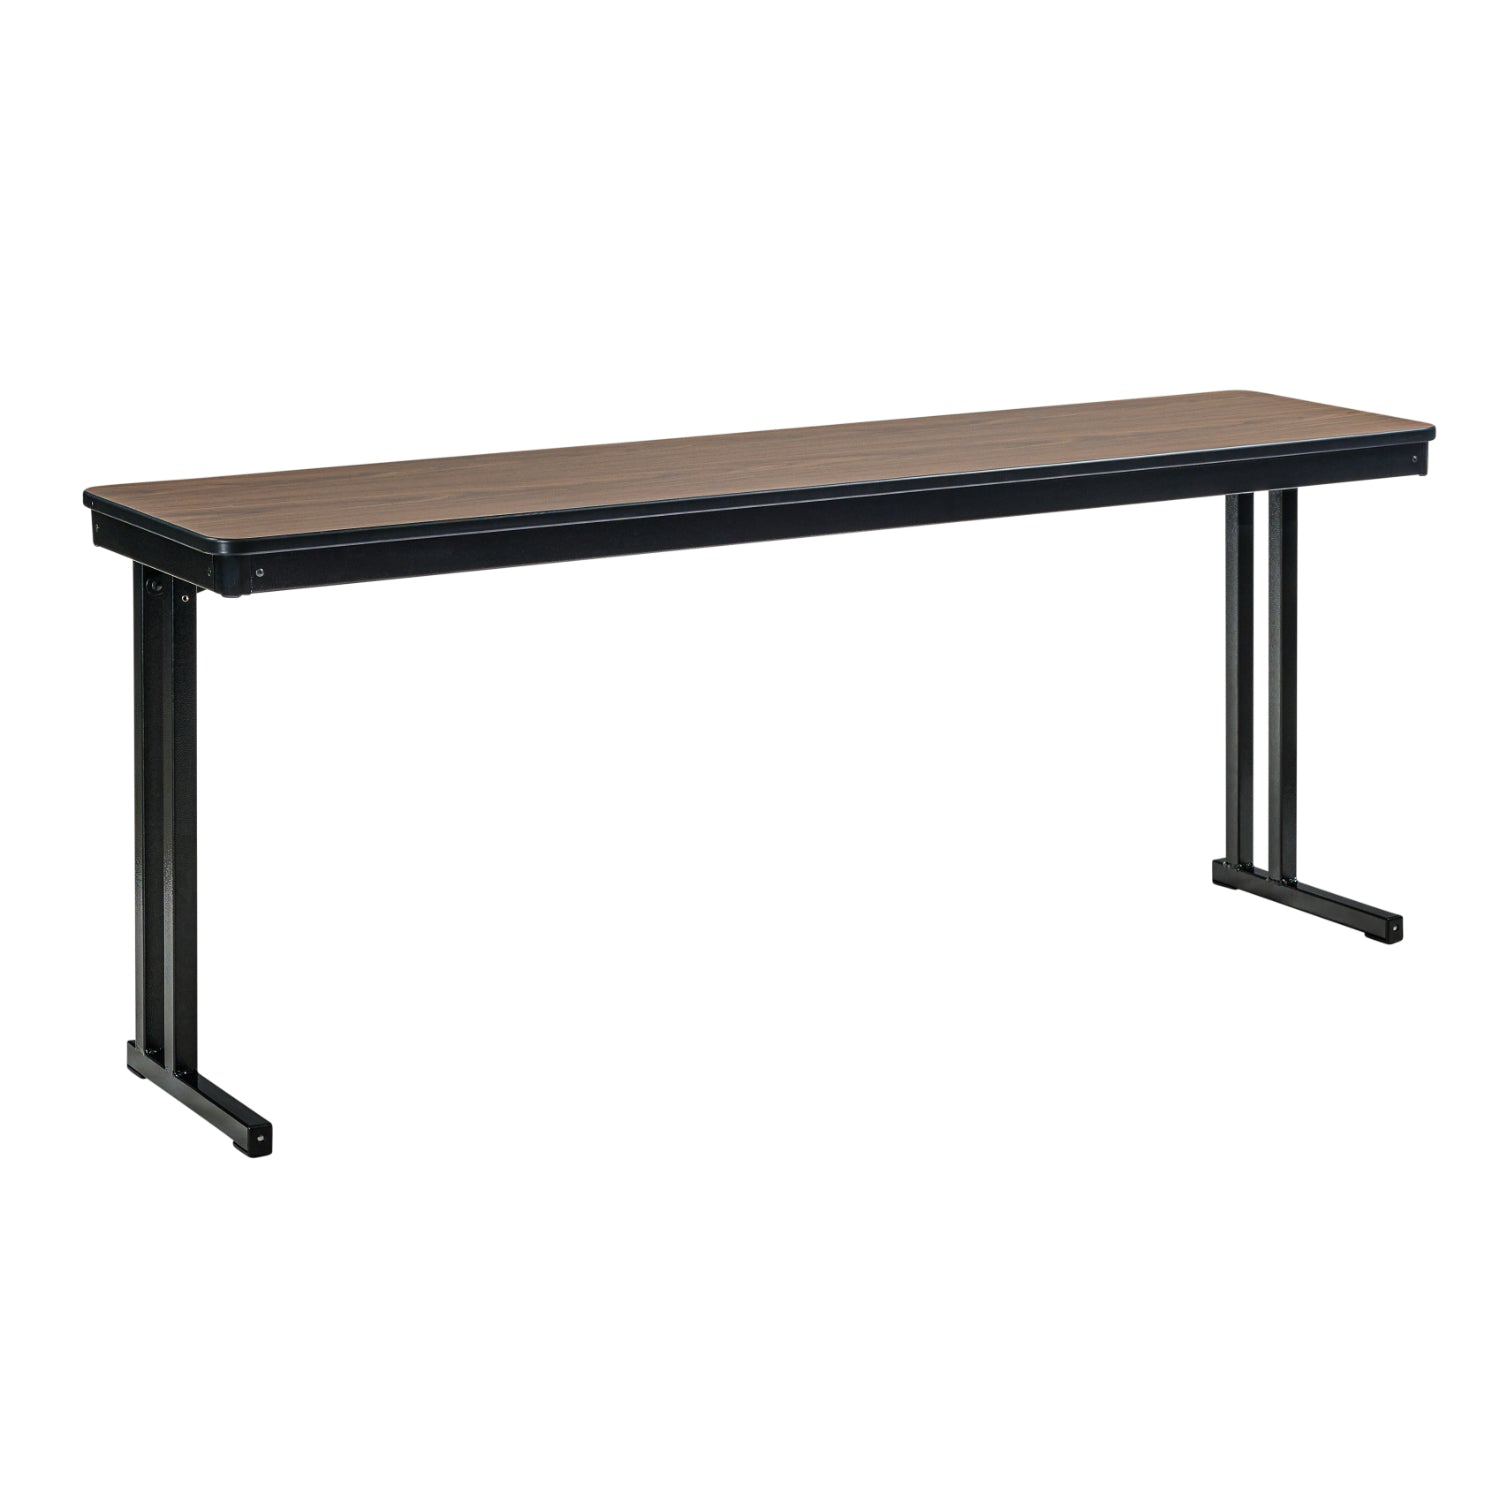 Max Seating Folding Training and Seminar Table with Cantilever Legs, 24" x 96", High Pressure Laminate Top with Particleboard Core/T-Mold Edge